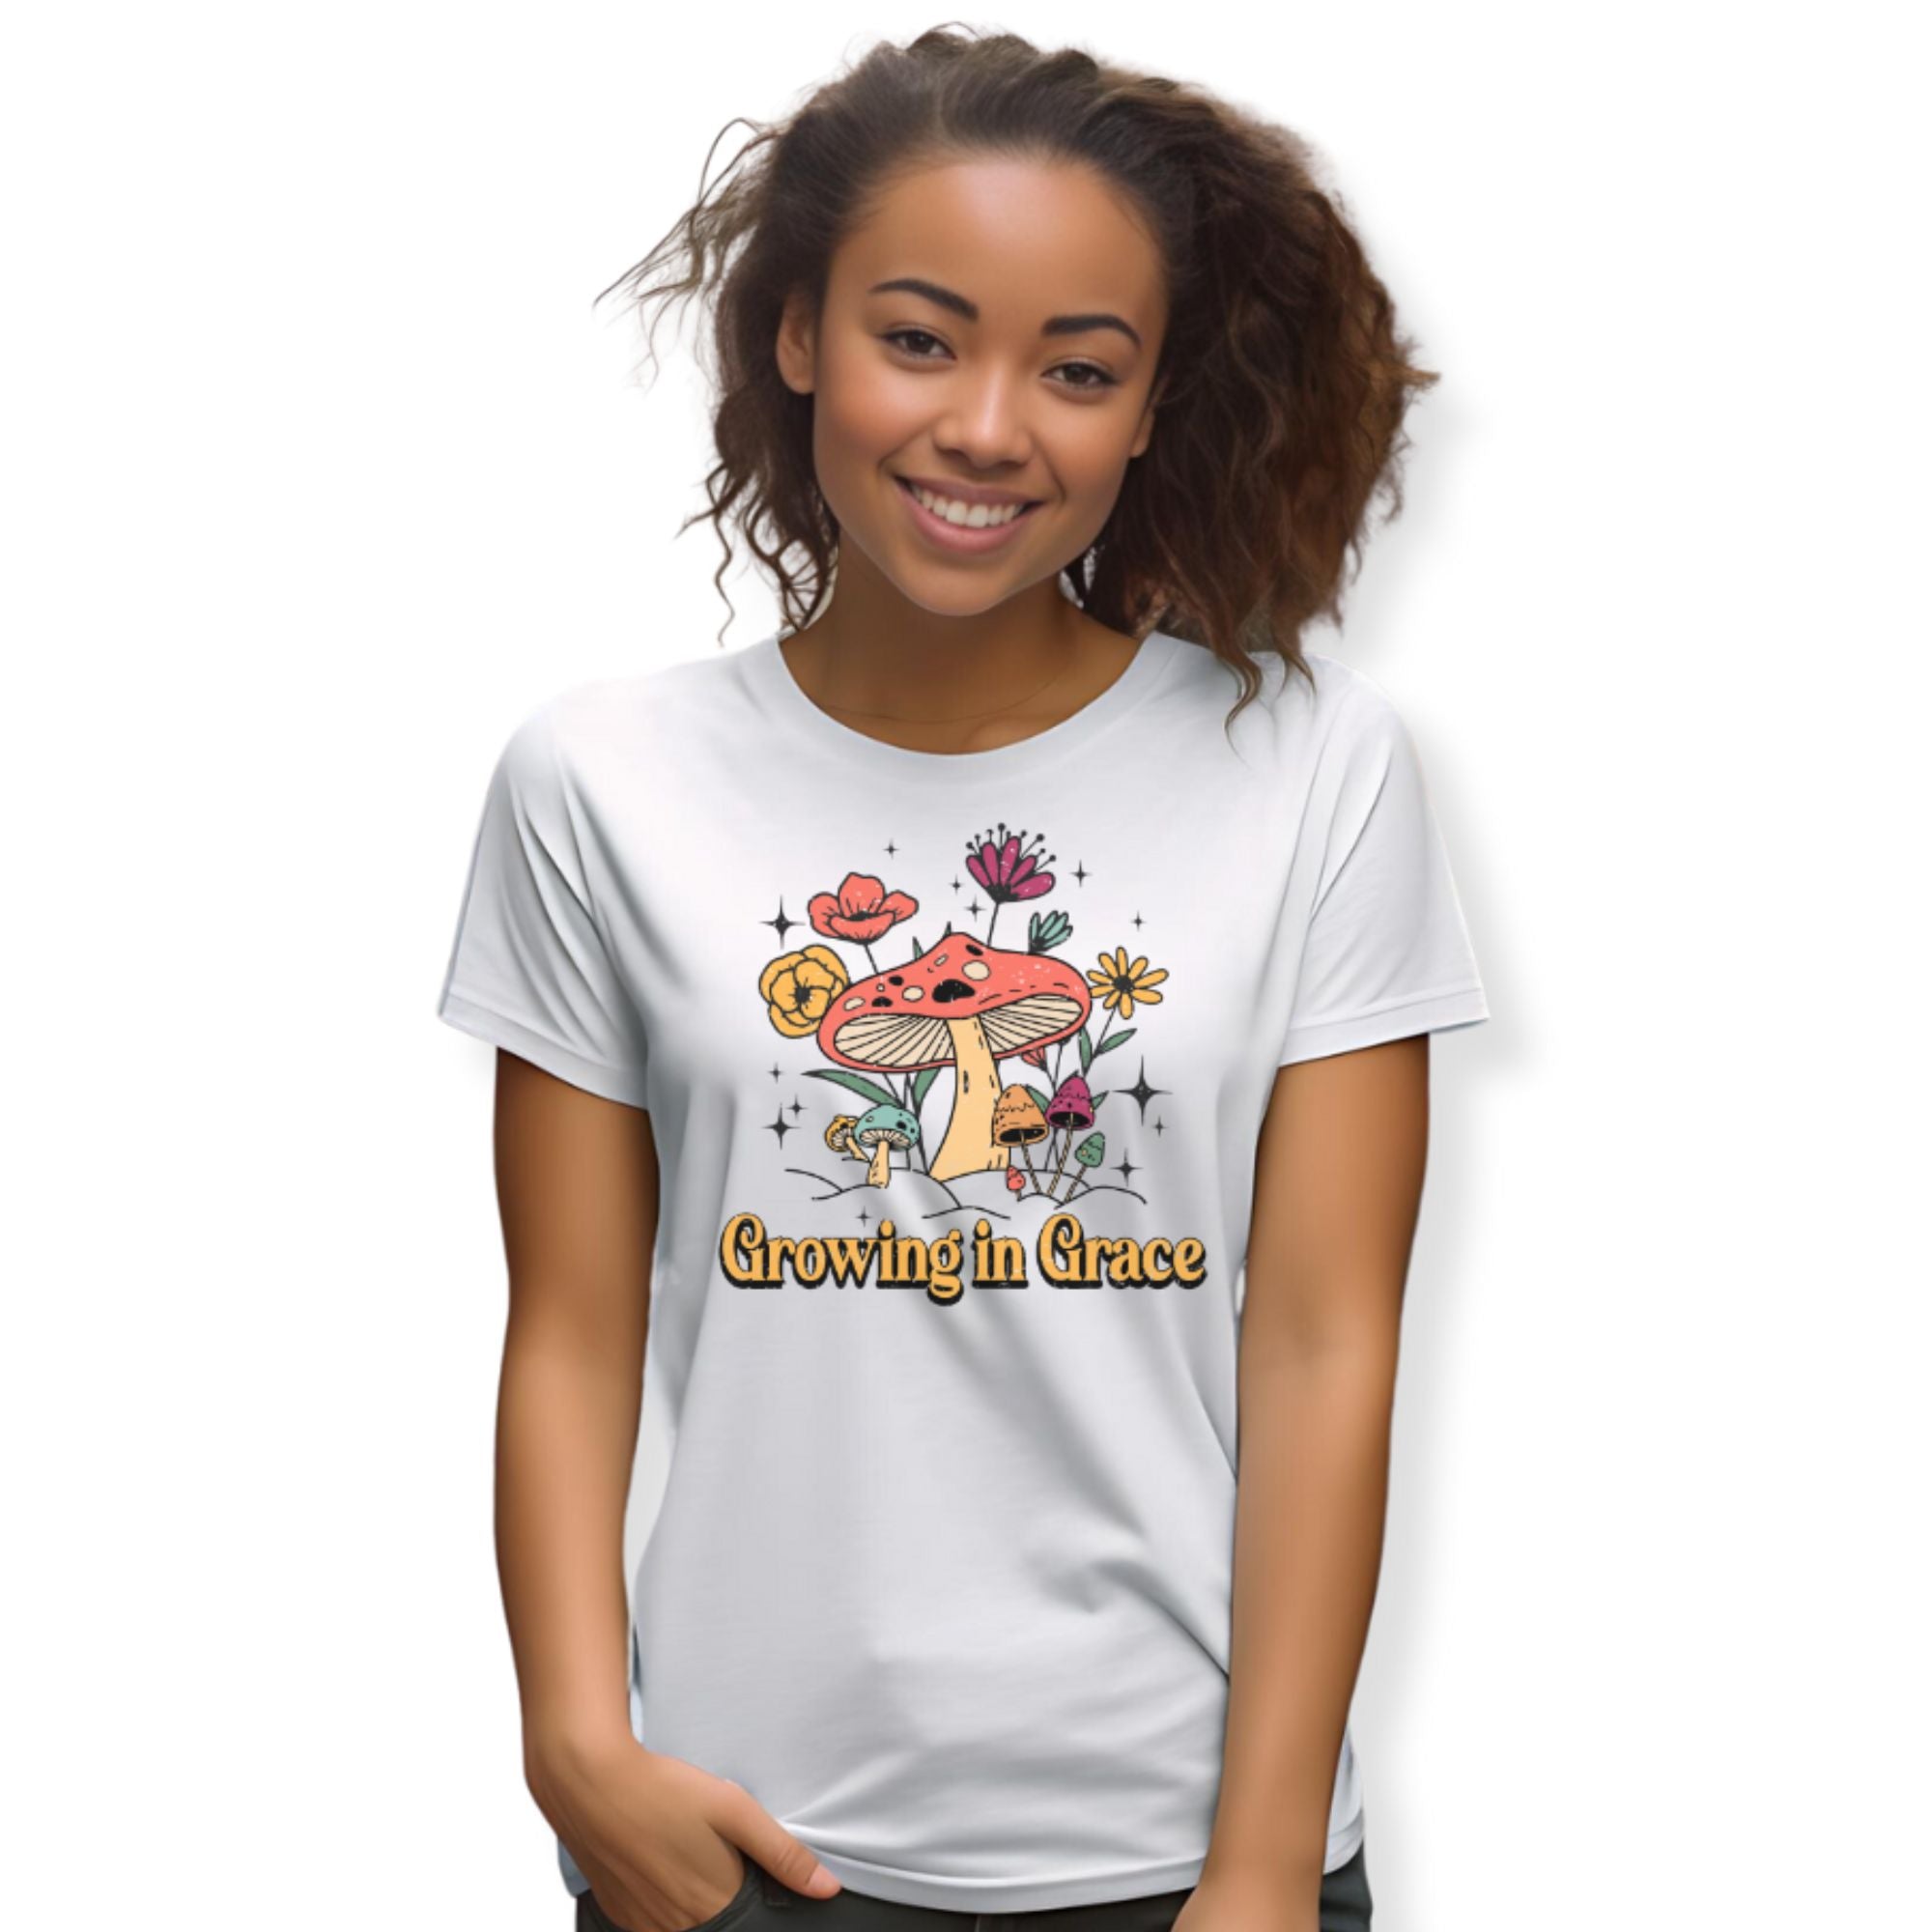 Growing in Grace Cute Mushroom Jersey Short Sleeve T-Shirt Color: Athletic Heather Size: XS Jesus Passion Apparel